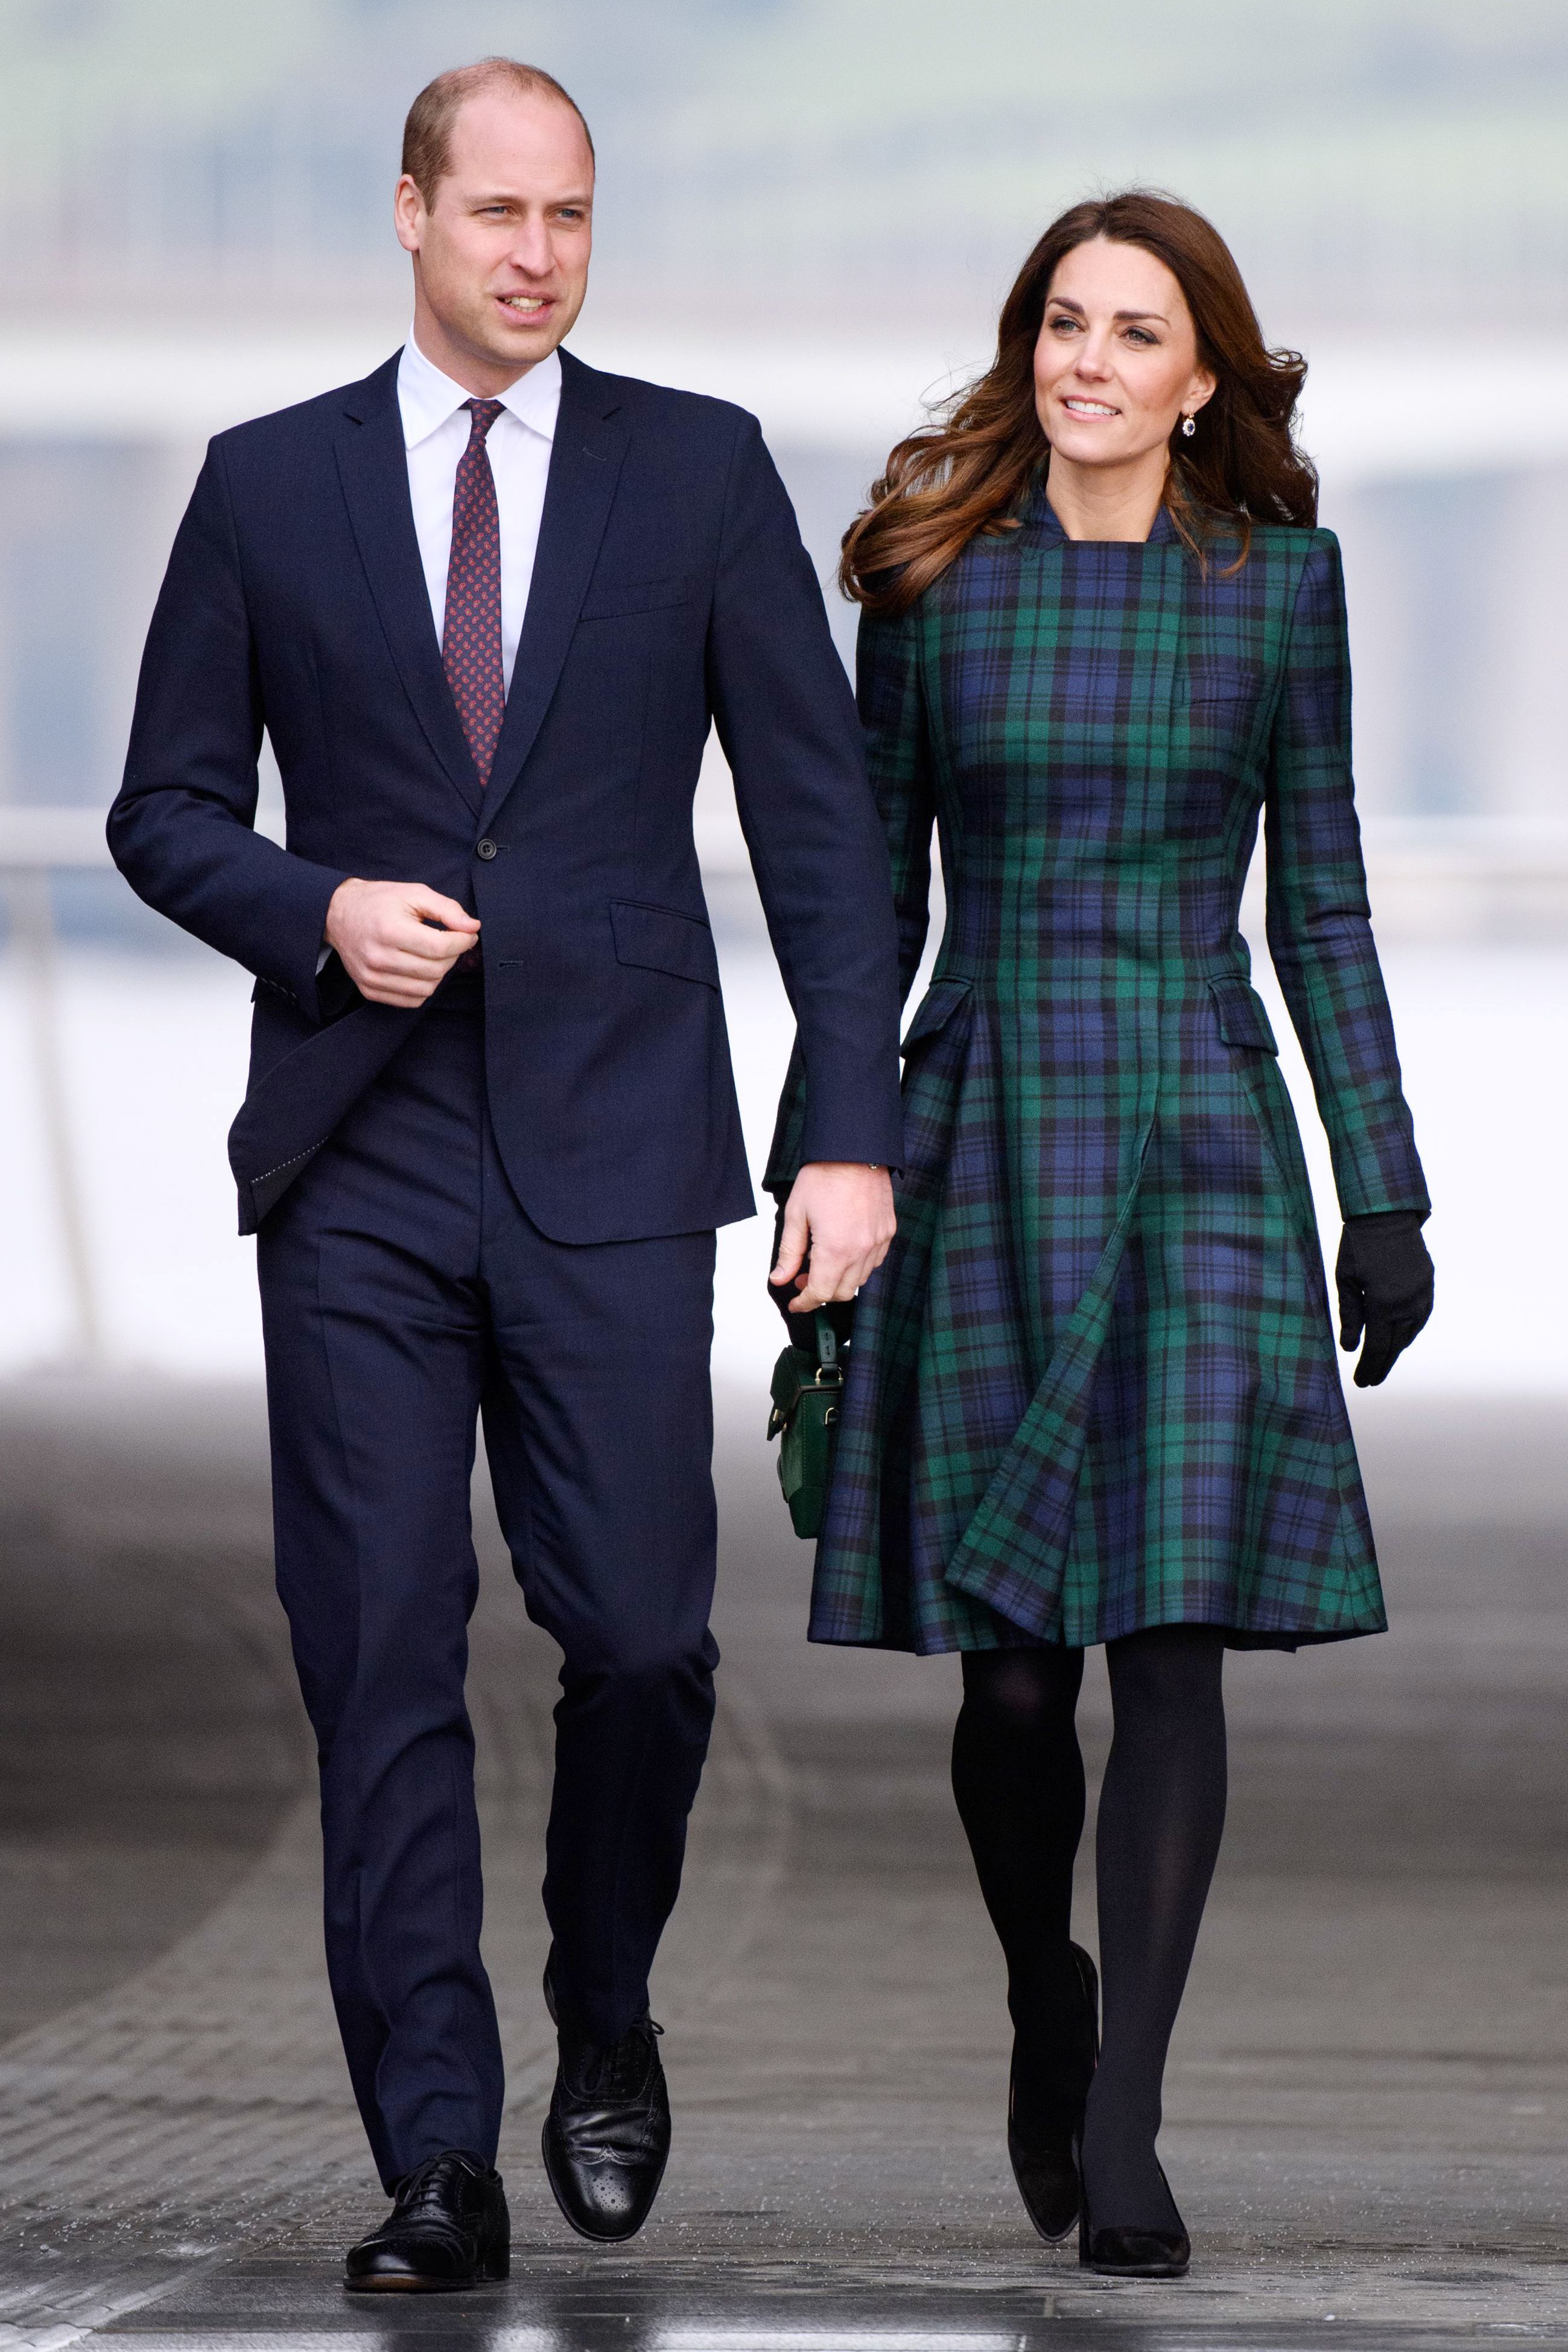 <p>A plaid-clad <a href="https://www.wonderwall.com/celebrity/profiles/overview/duchess-kate-1356.article">Duchess Kate</a> joined <a href="https://www.wonderwall.com/celebrity/profiles/overview/prince-william-482.article">Prince William</a> in Dundee, Scotland, to officially open the V&A design museum on Jan. 29, 2019. When visiting the northern country, the married couple use their Scottish titles, Earl and Countess of Strathearn.</p>